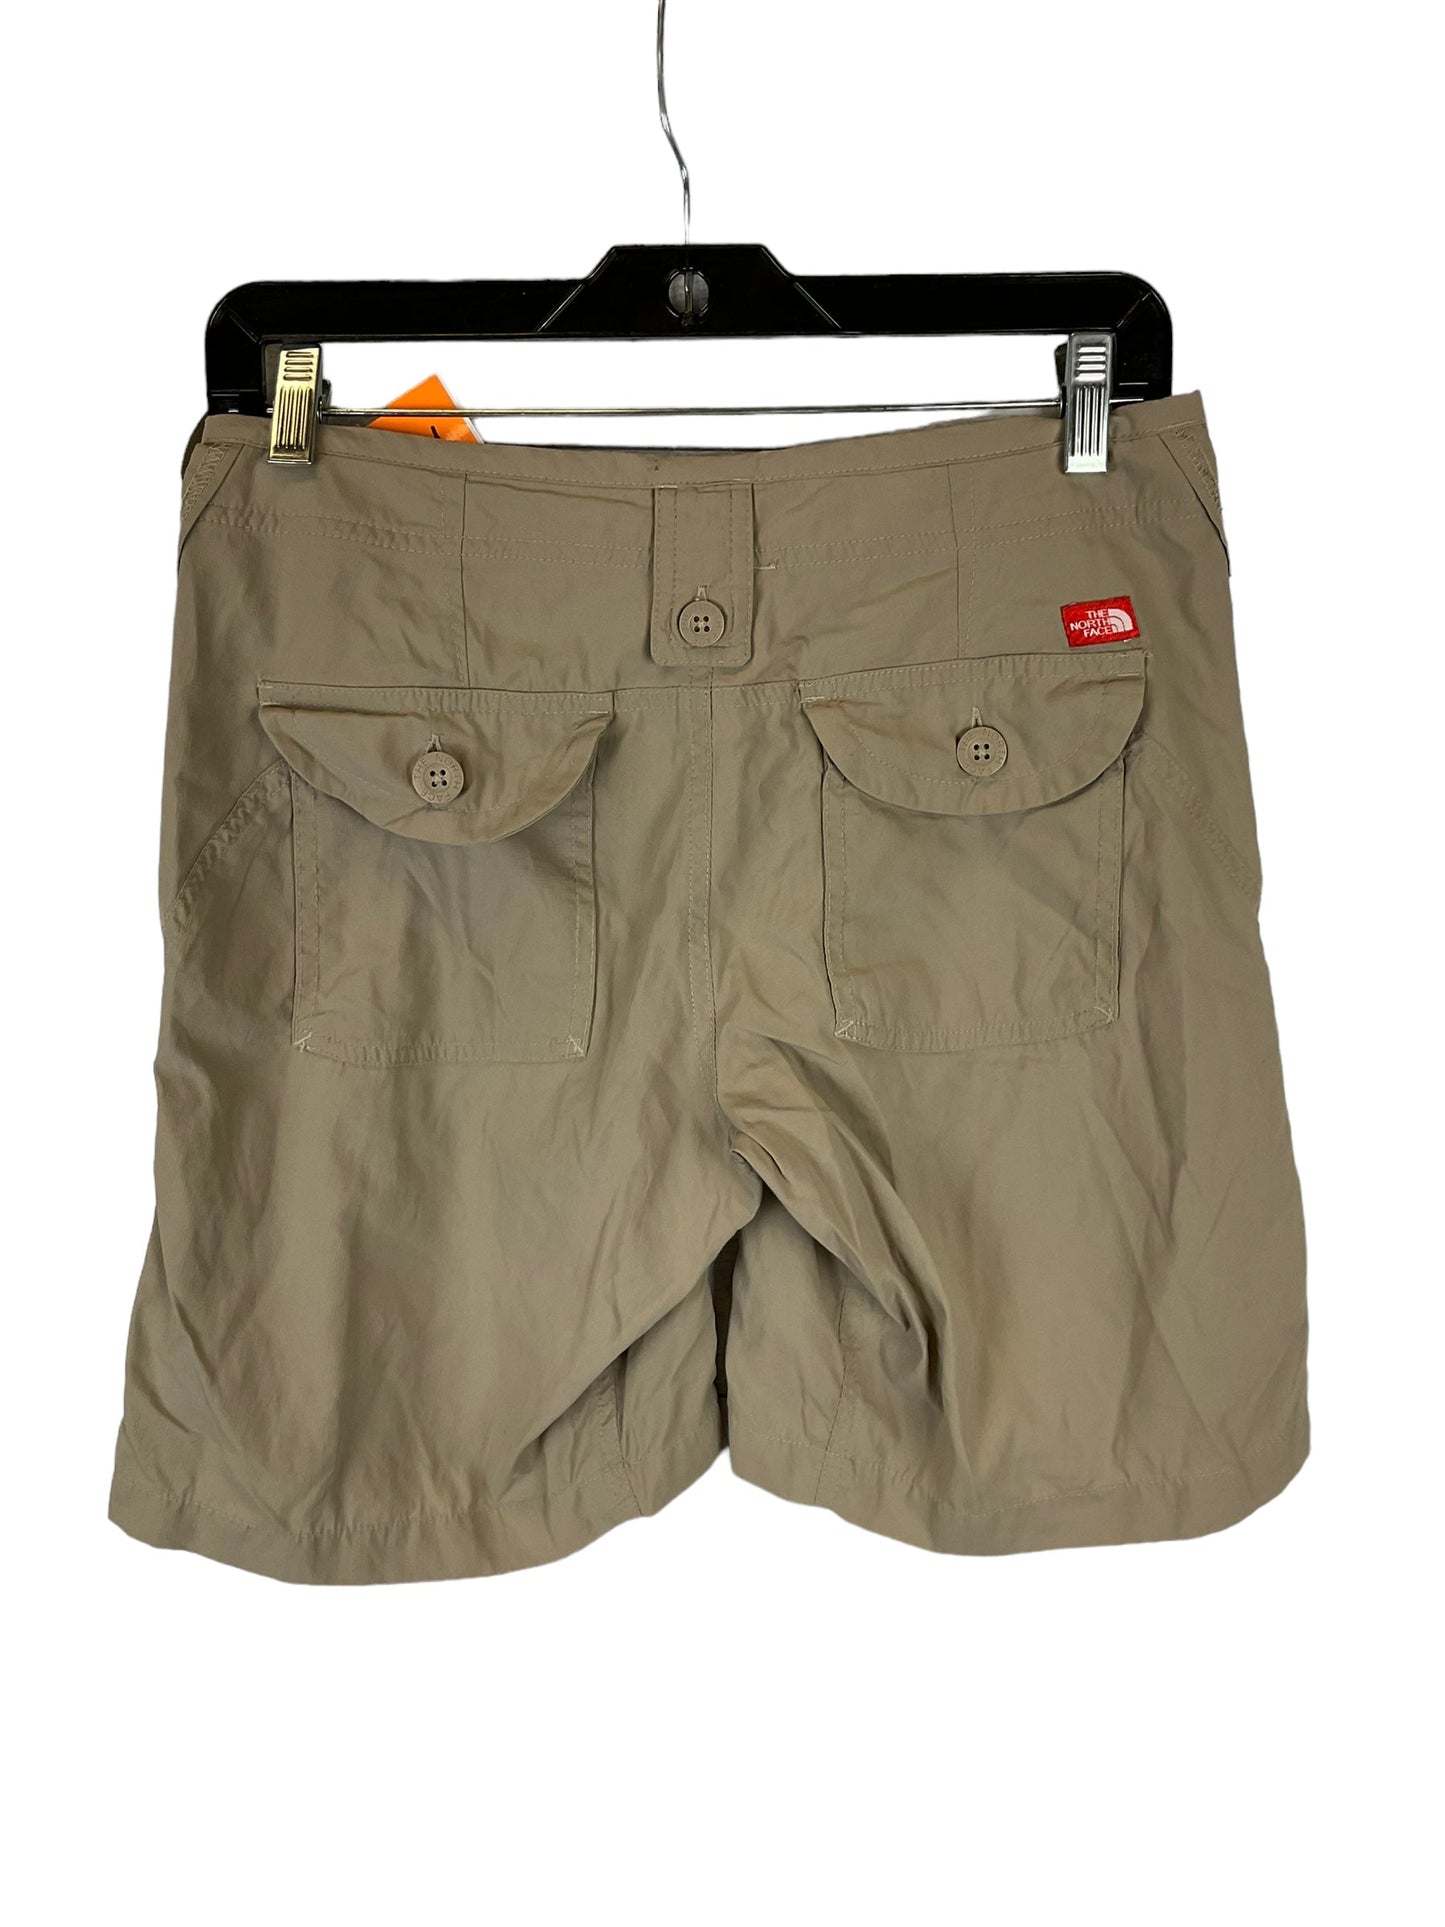 Athletic Shorts By North Face  Size: 2